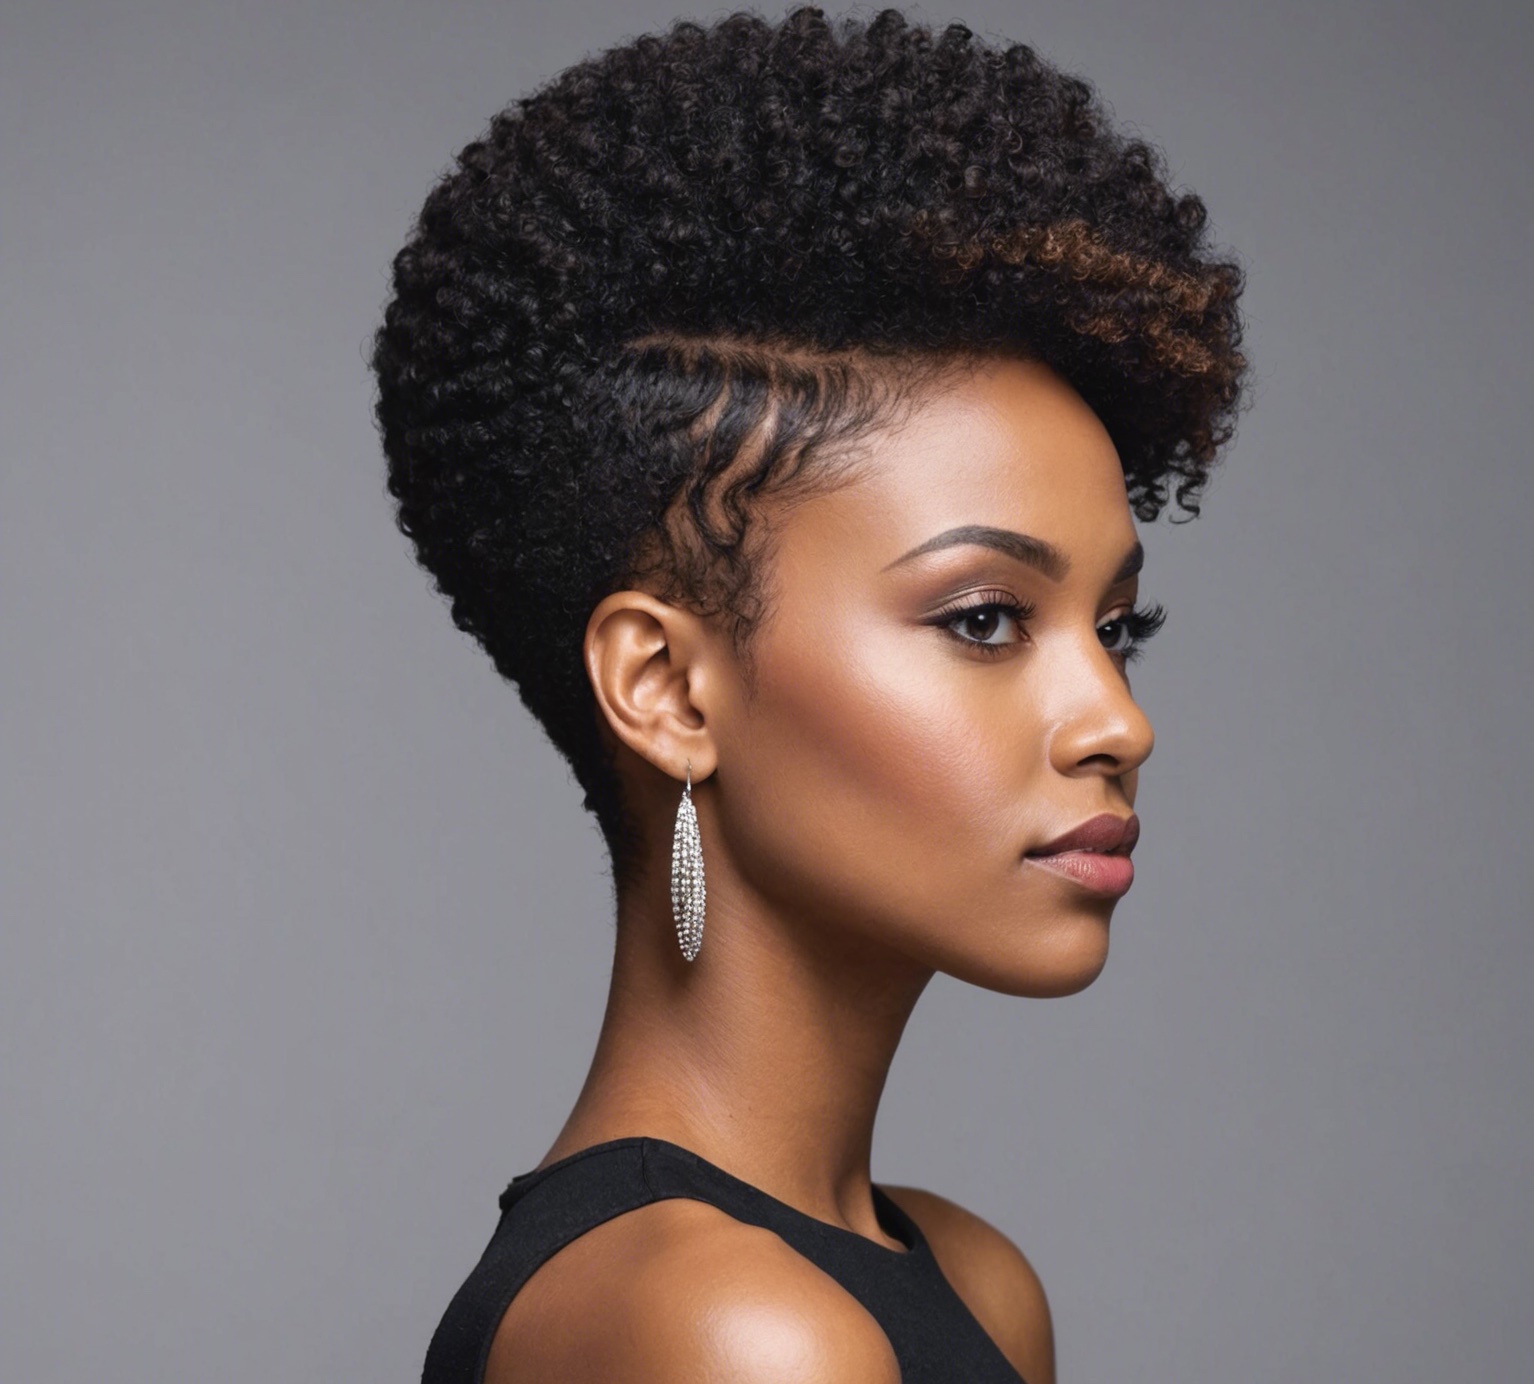 How to Taper Cut Female’s Afro Hair